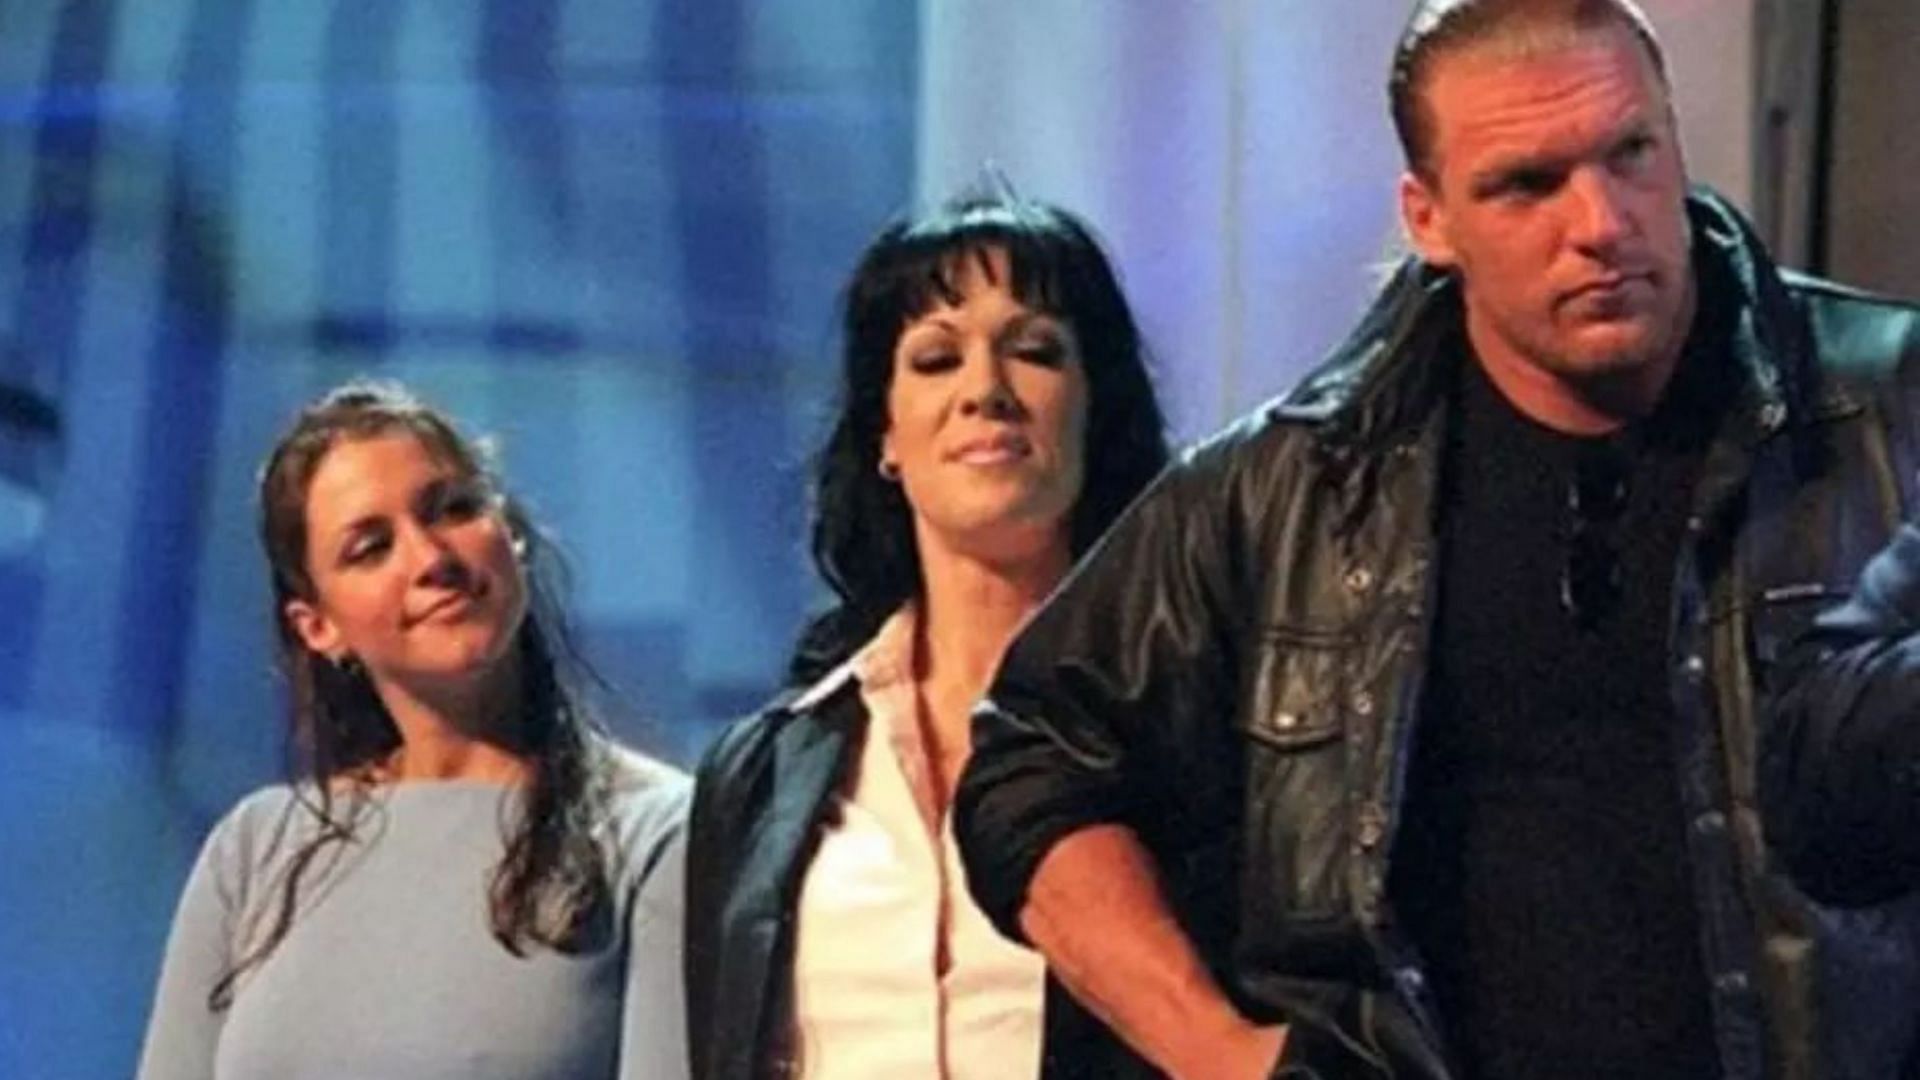 The Game does not believe he cheated on Chyna with Stephanie McMahon